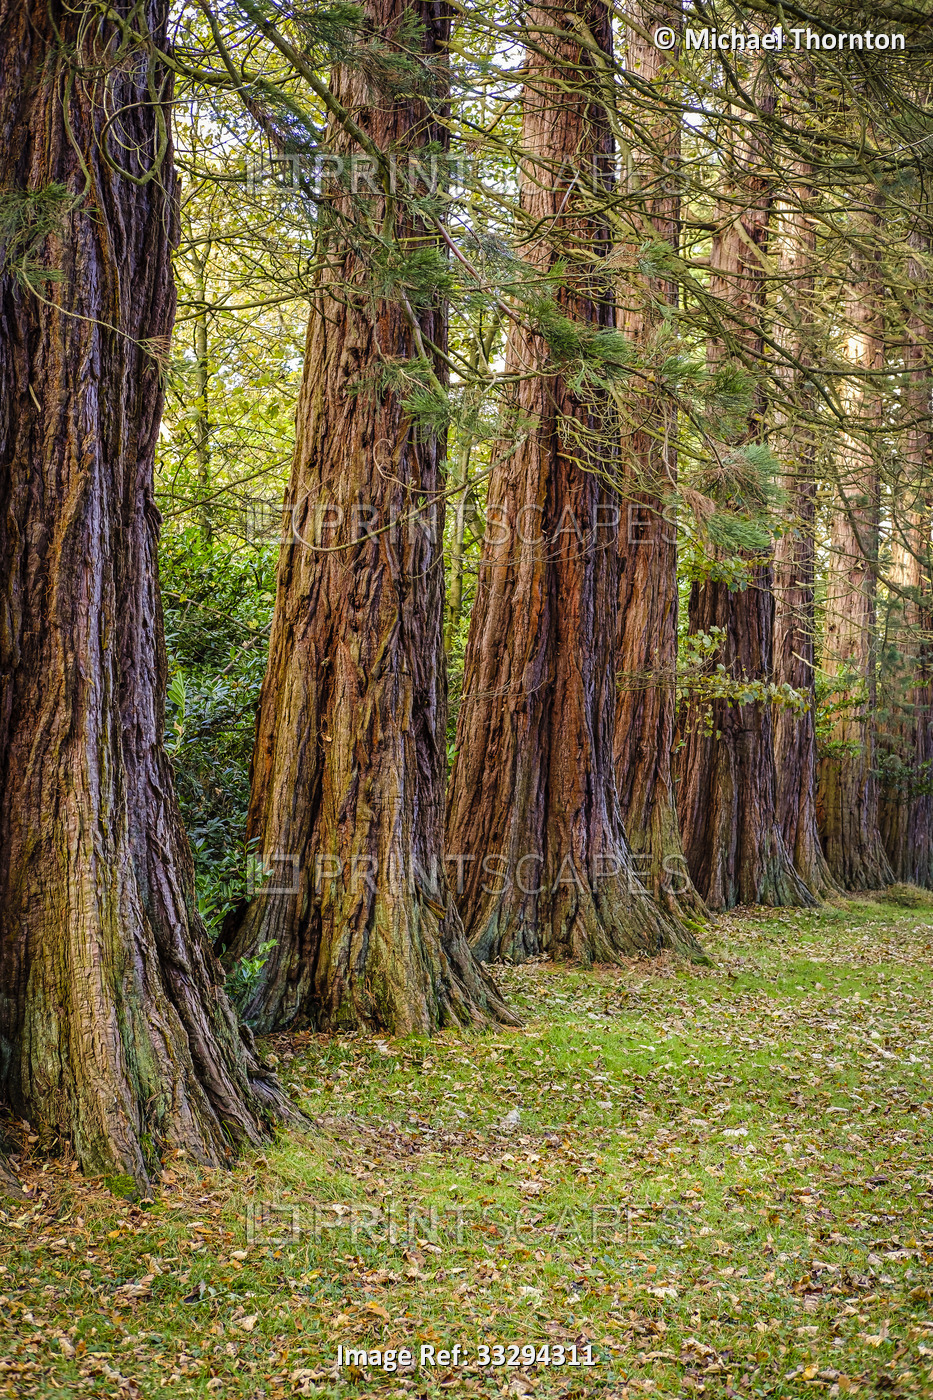 Giant Redwood Trees at Minsteracres, Consett, County Durham, United Kingdom